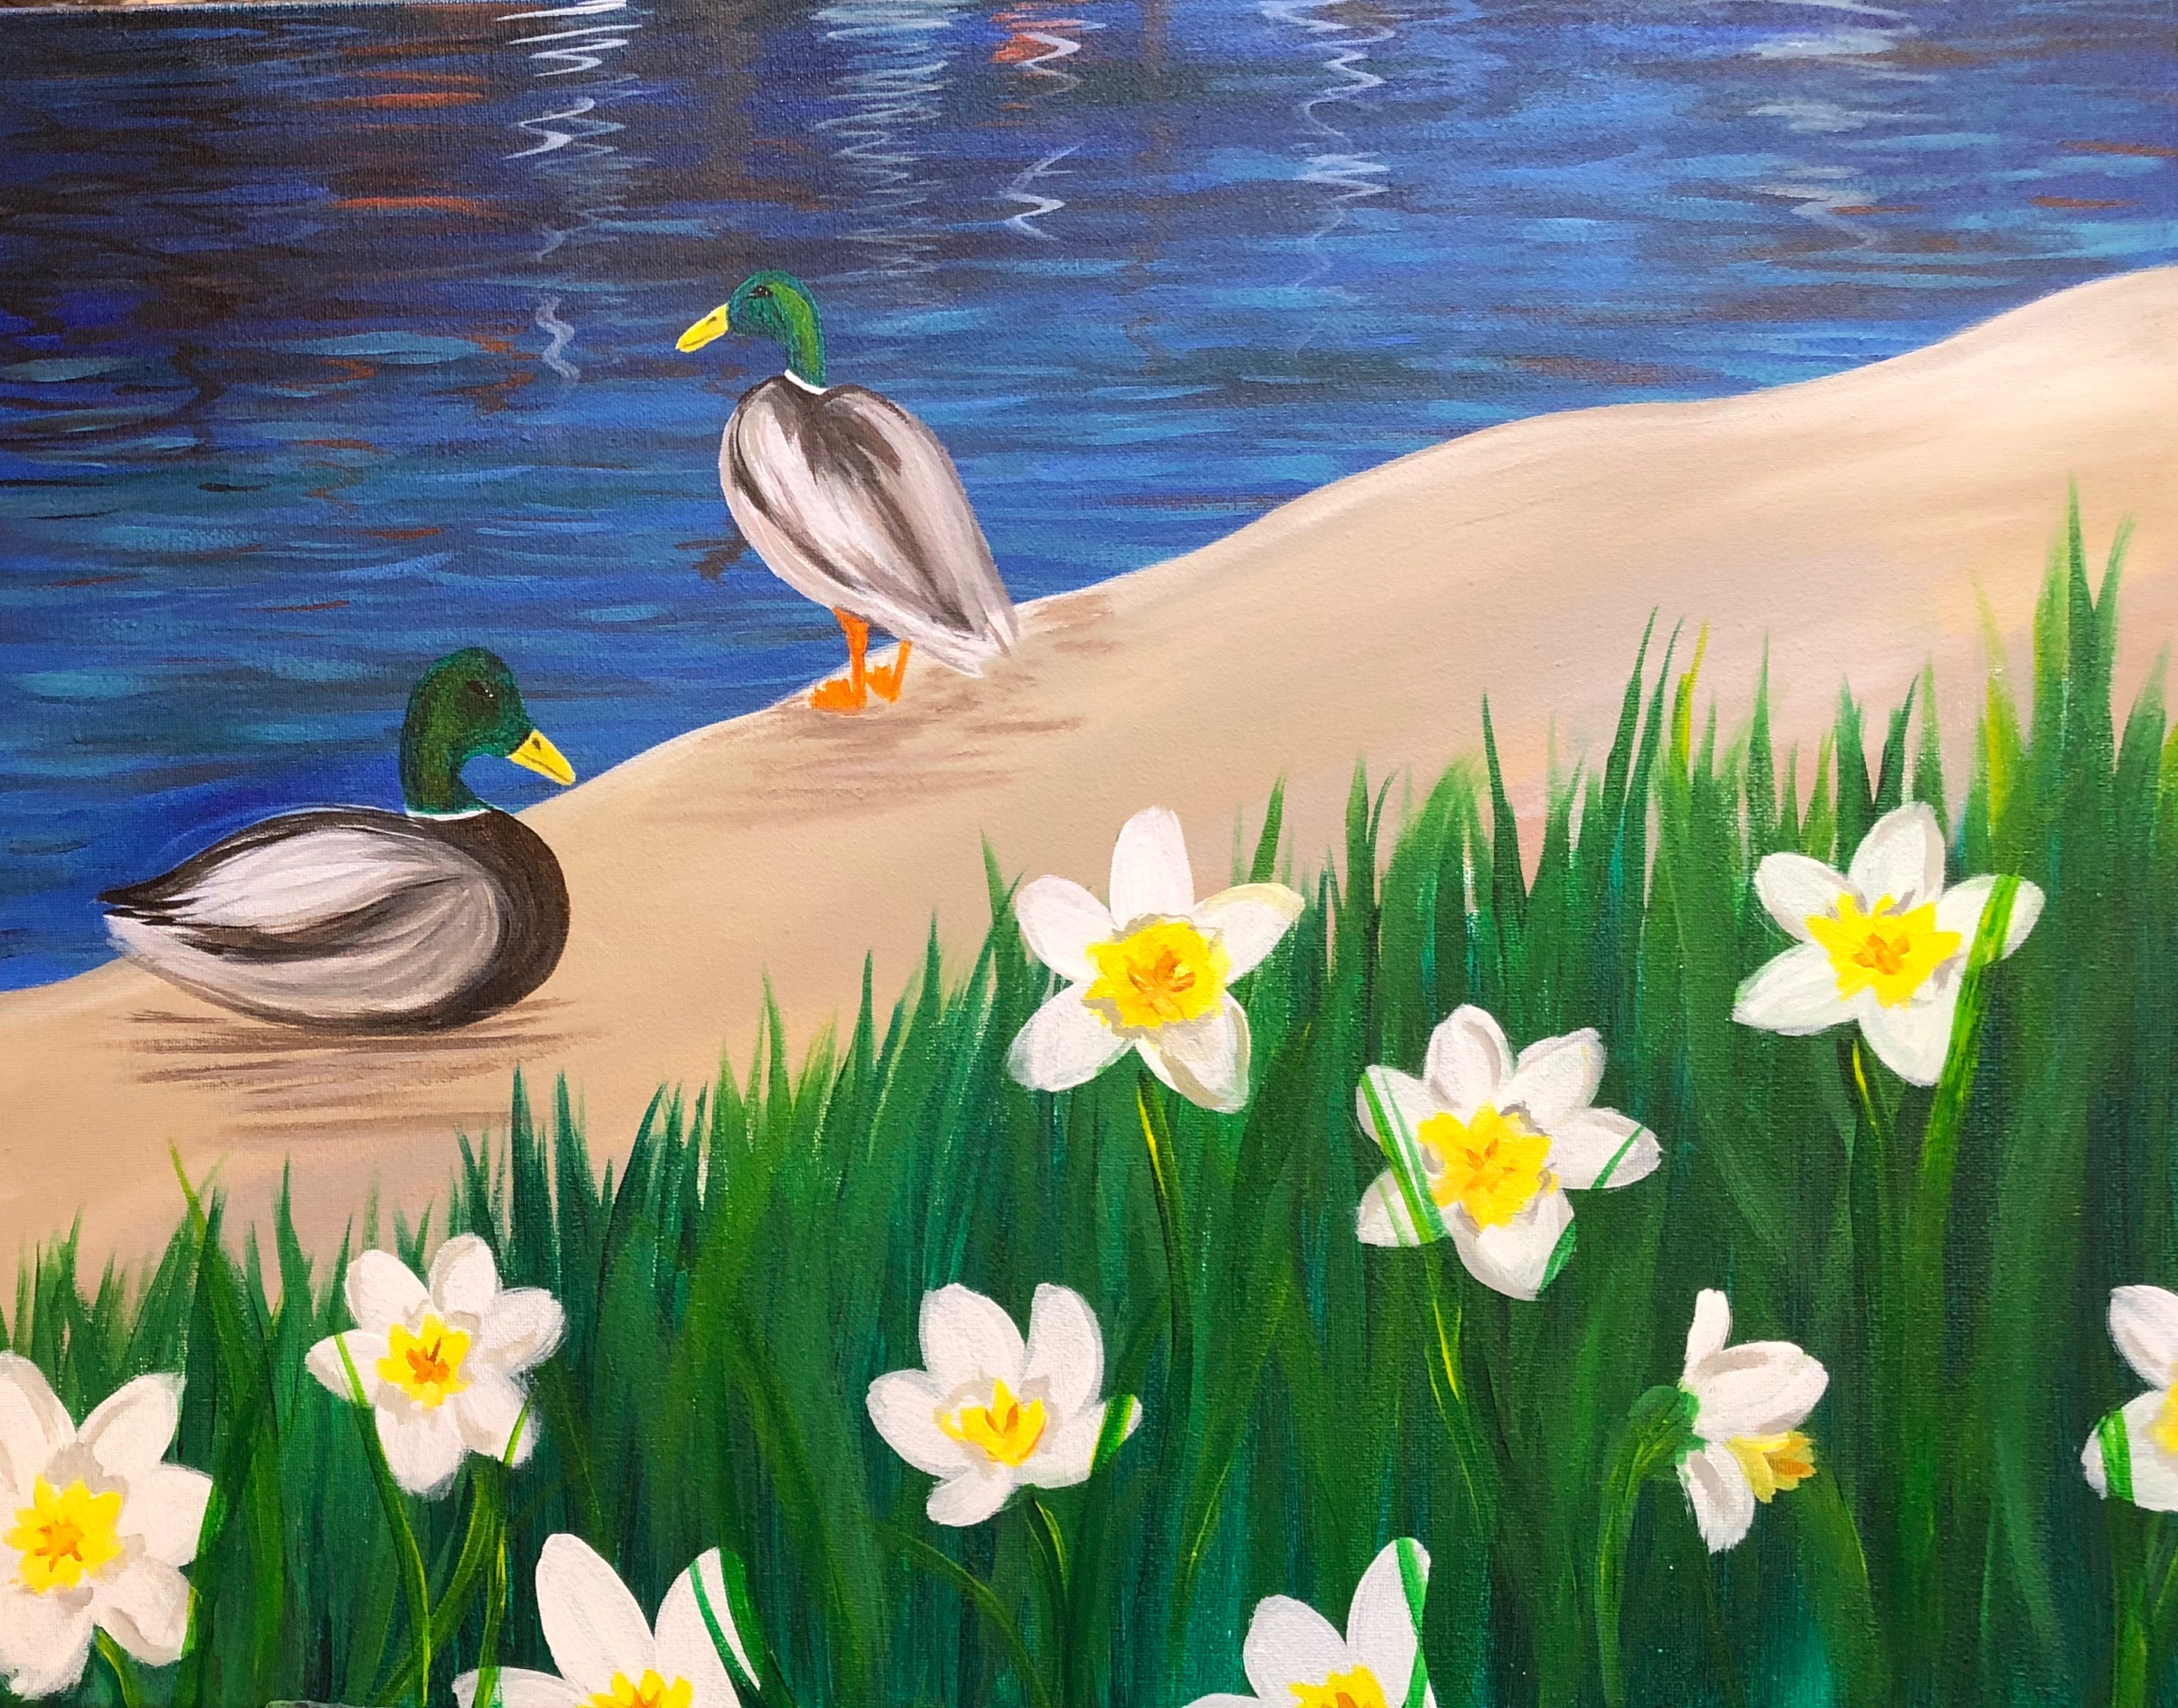 Don’t Feed The Ducks: Painting For A Great Cause